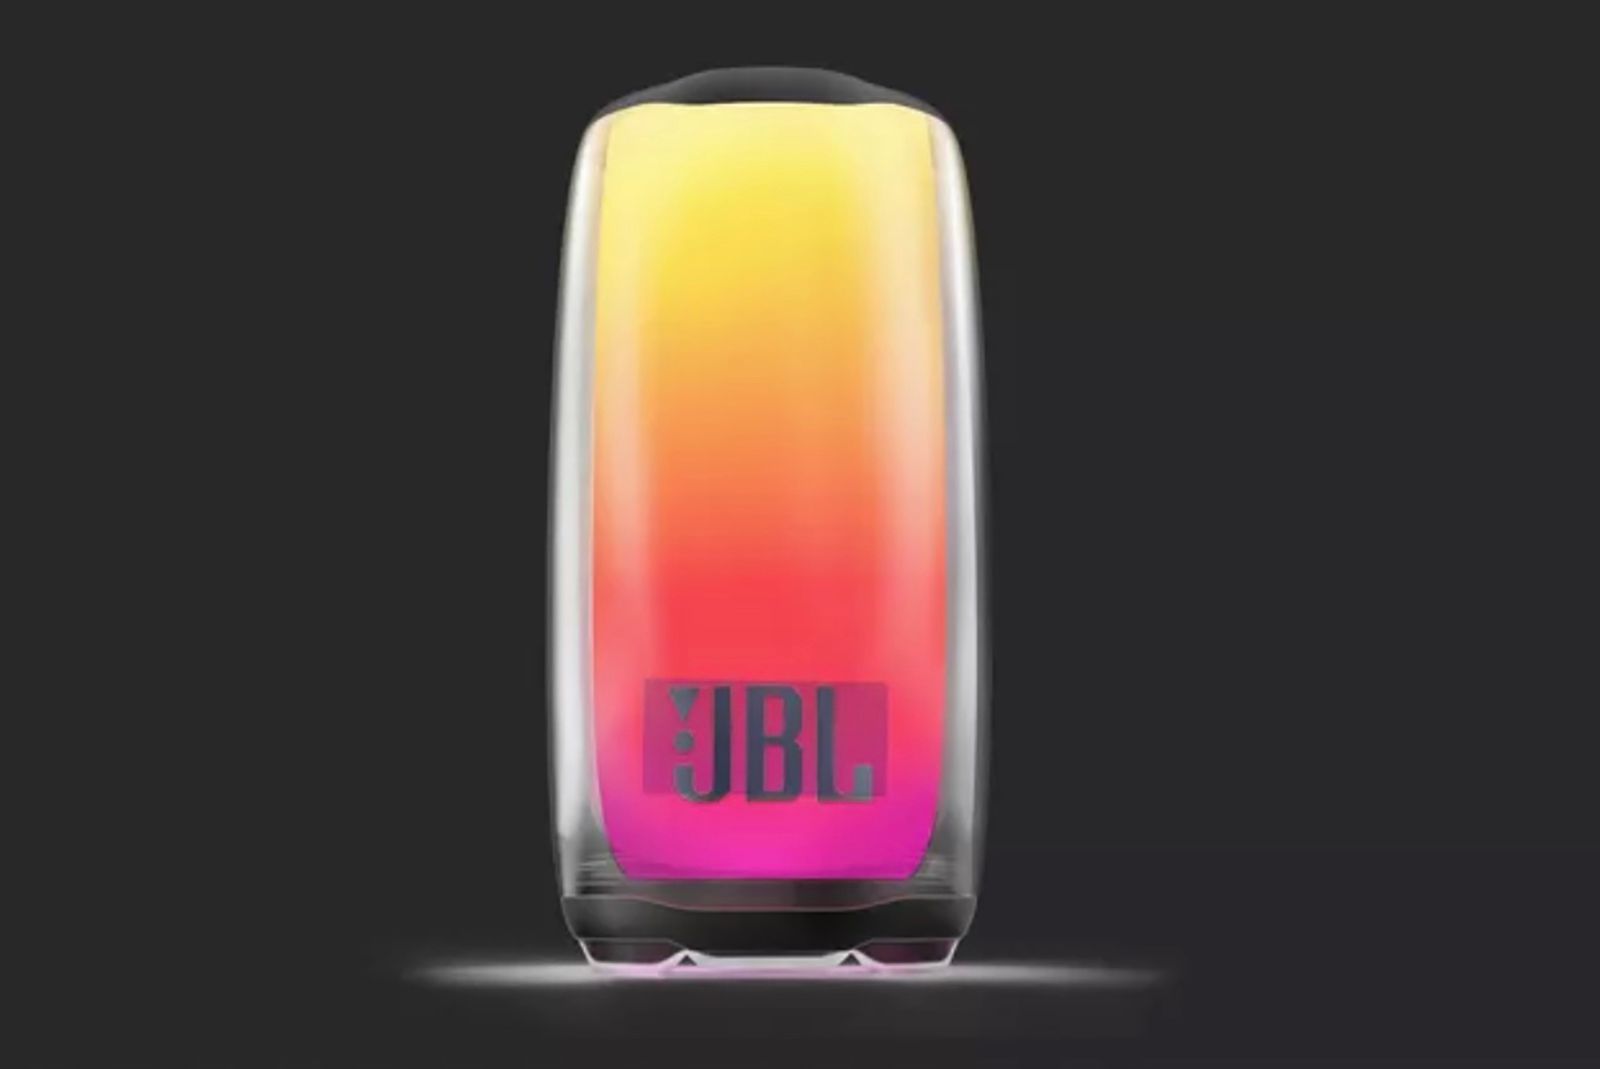 JBL rolls out several Bluetooth speakers and wireless earbuds at CES 2022 photo 2